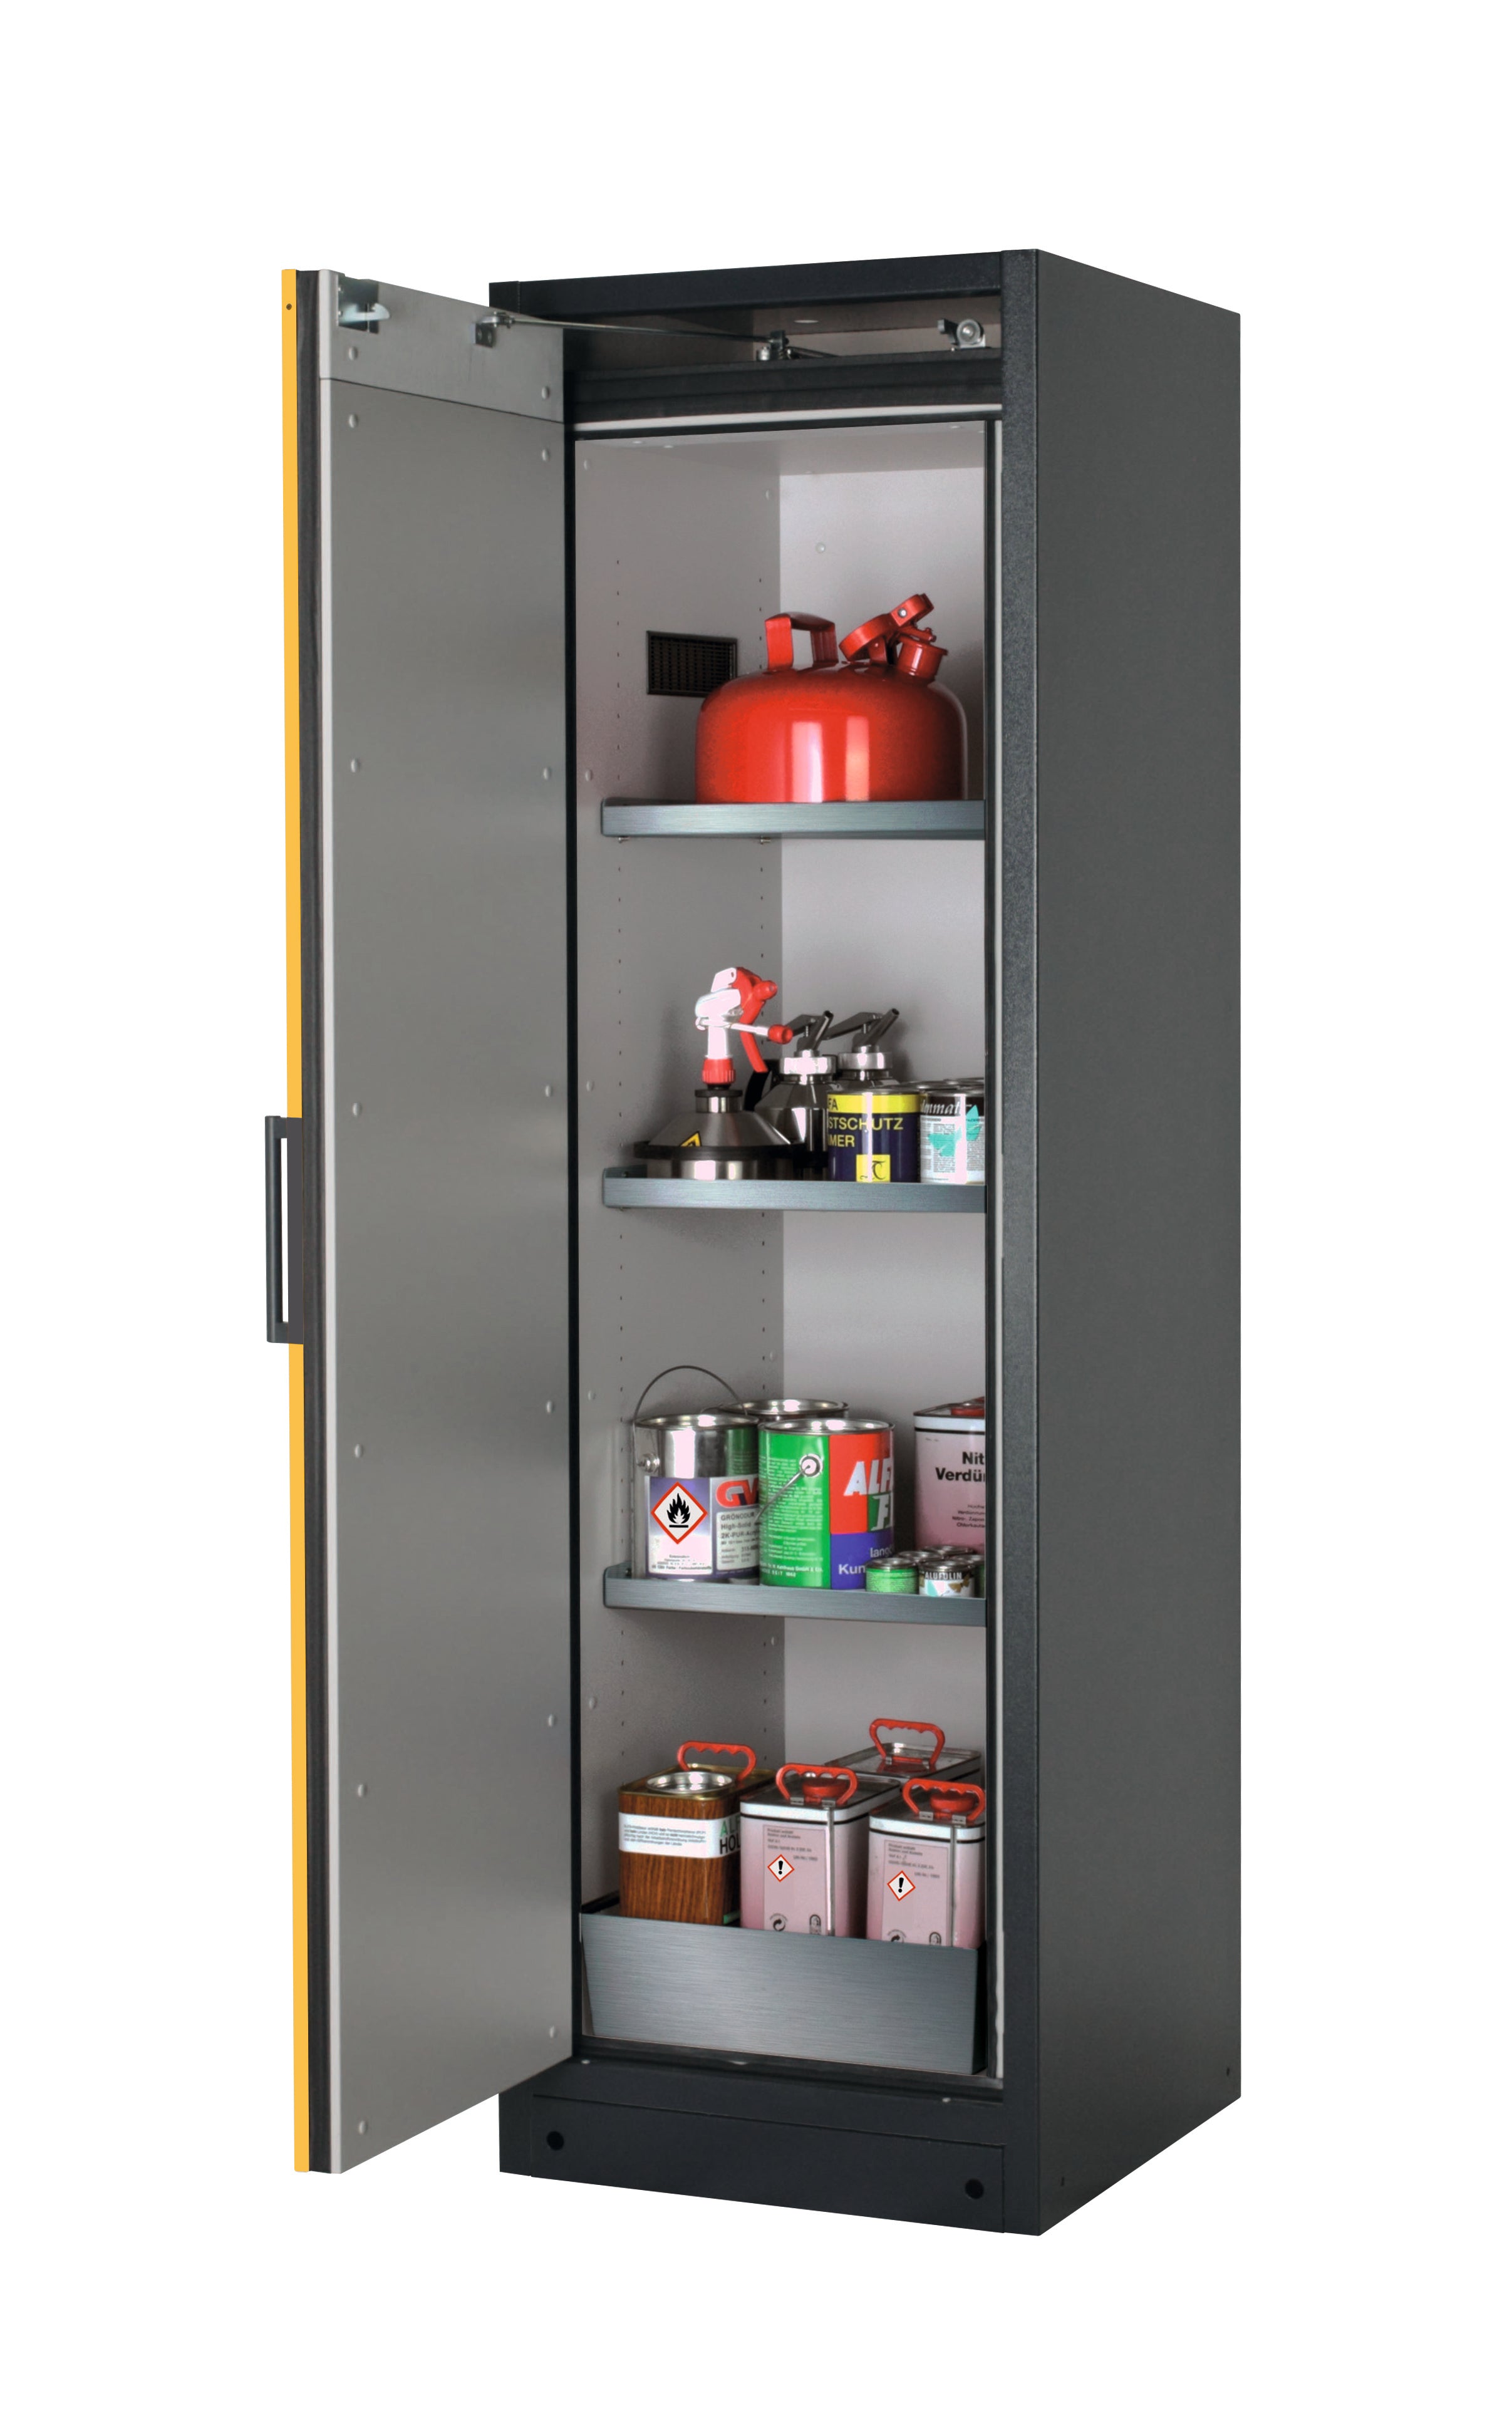 Type 90 safety storage cabinet Q-CLASSIC-90 model Q90.195.060 in warning yellow RAL 1004 with 3x shelf standard (stainless steel 1.4301),